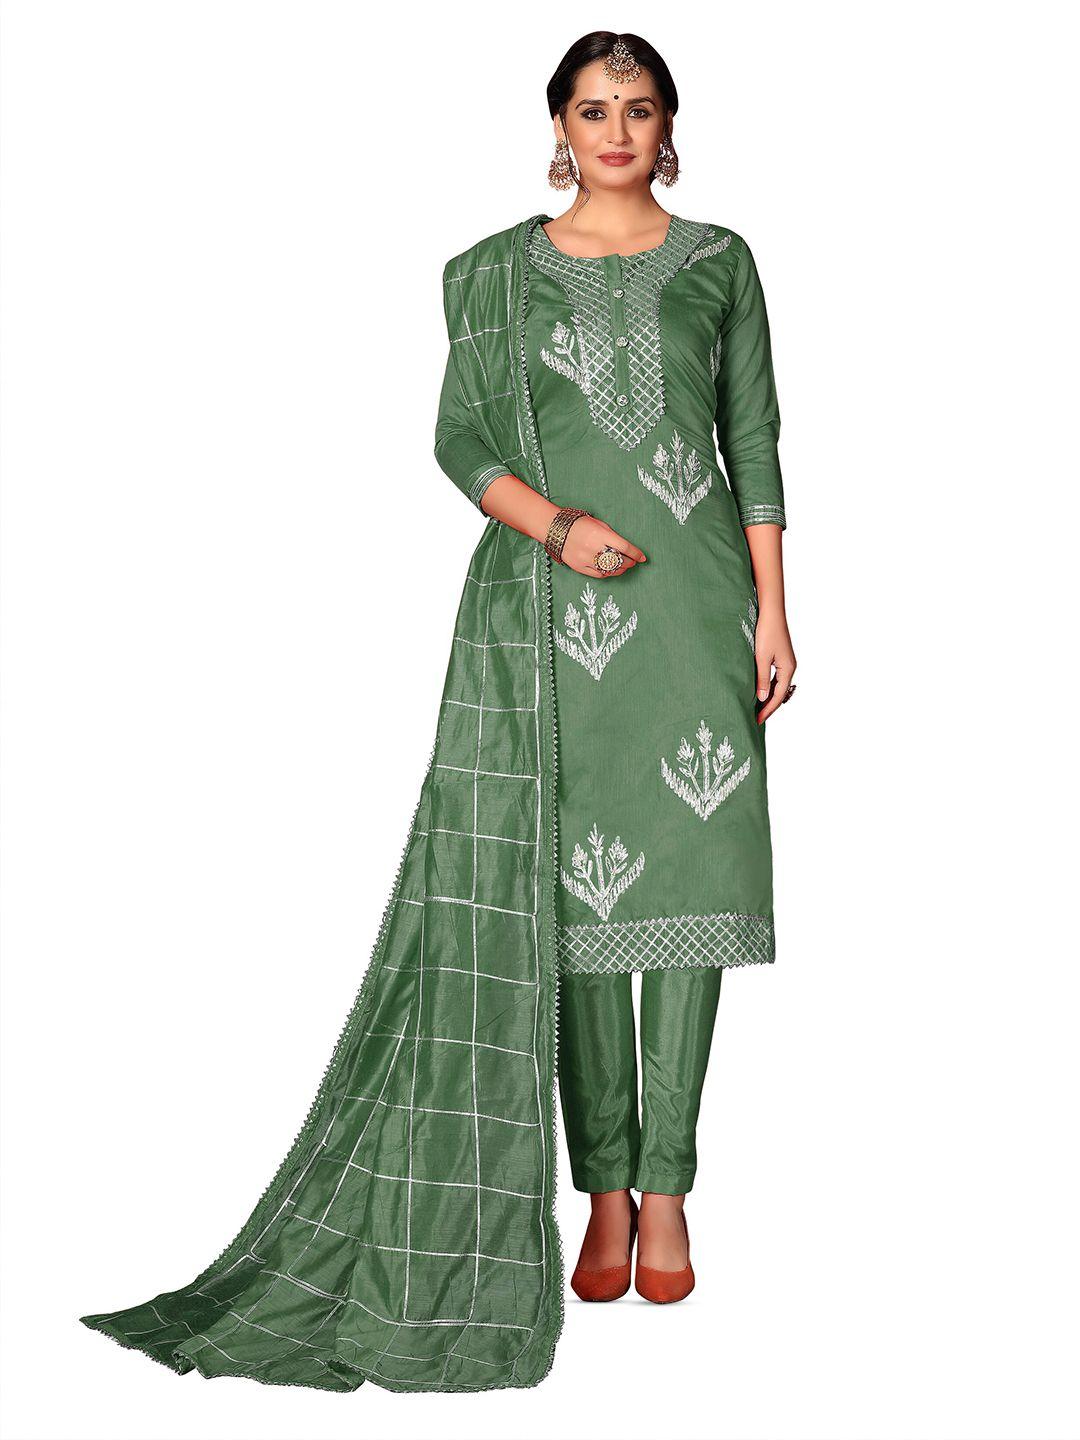 manvaa olive green unstitched dress material